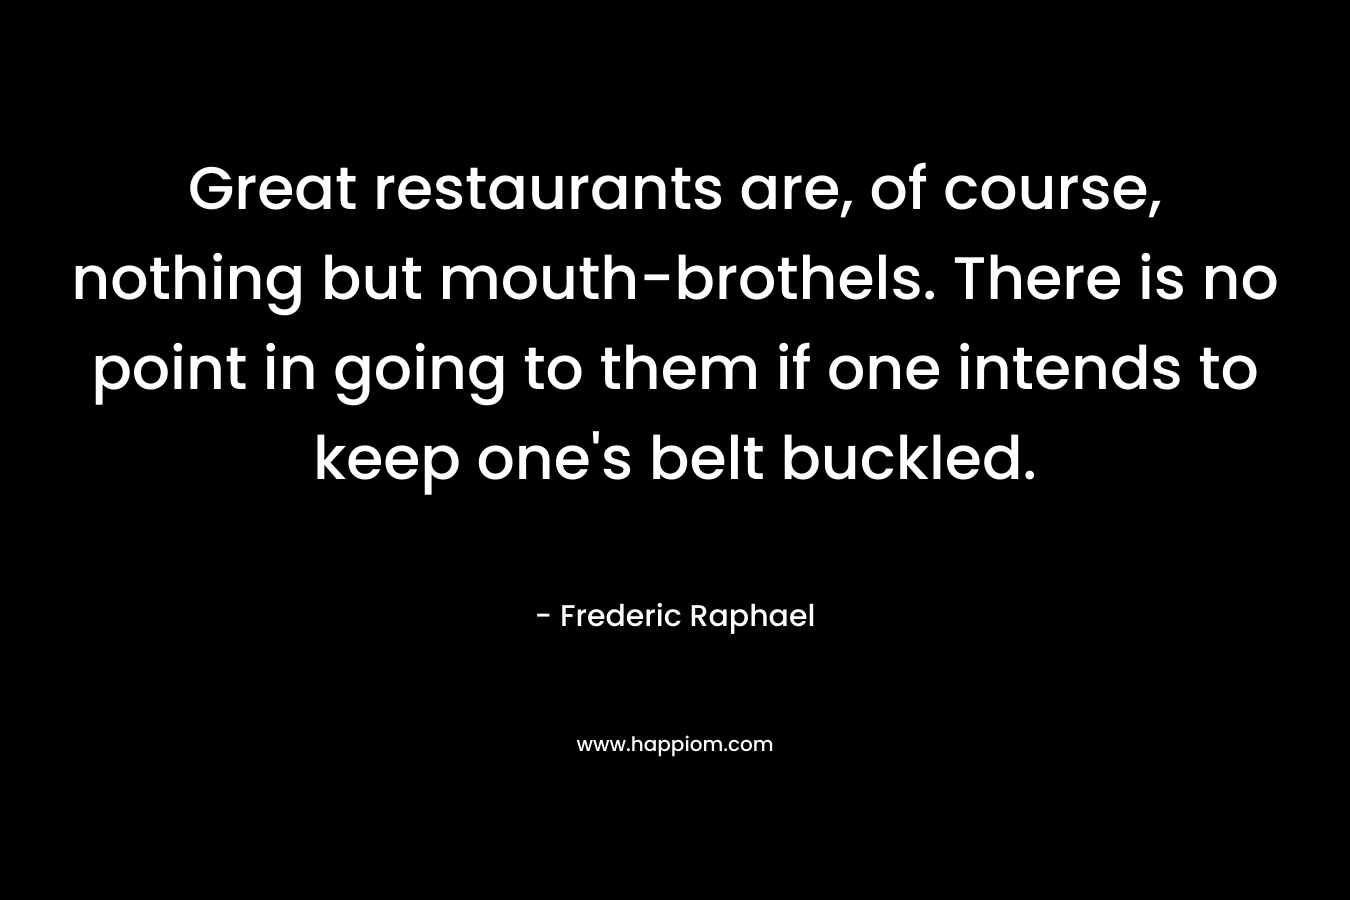 Great restaurants are, of course, nothing but mouth-brothels. There is no point in going to them if one intends to keep one’s belt buckled. – Frederic Raphael